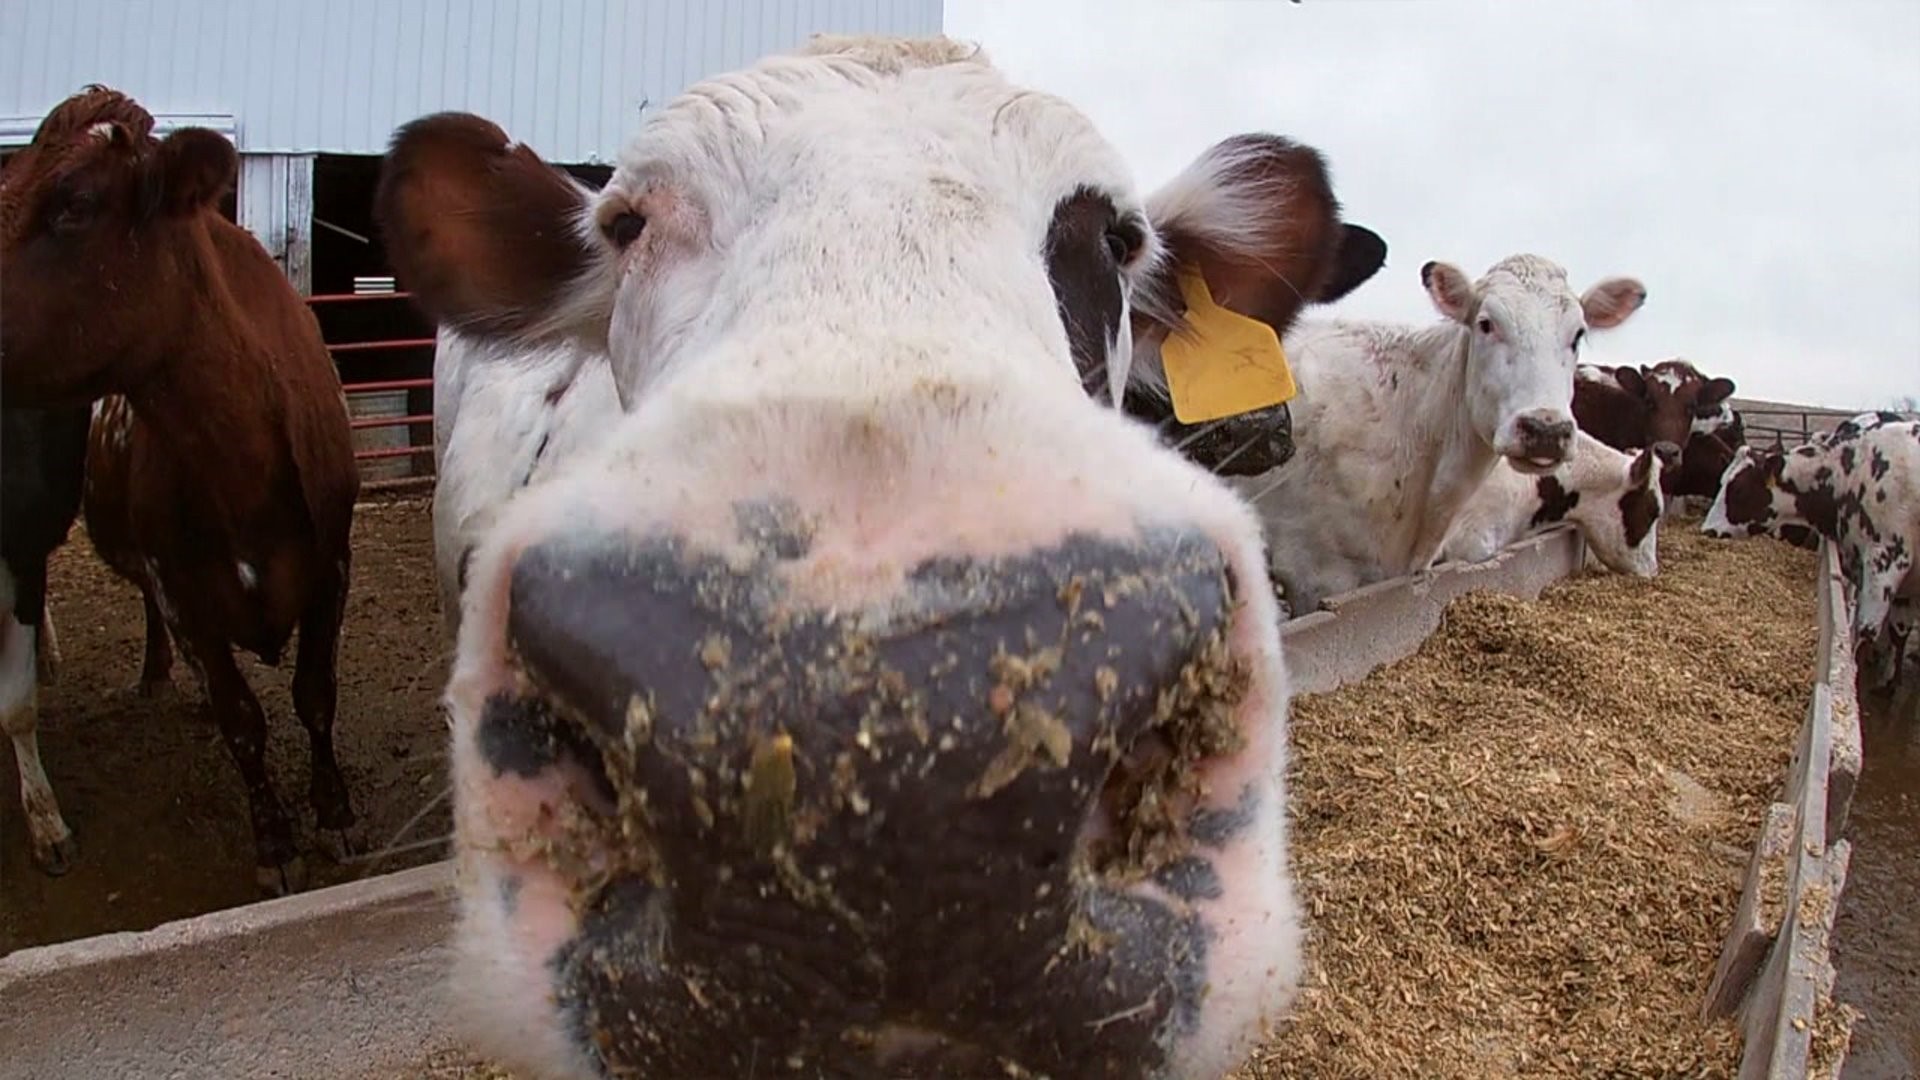 Cows tell each other how they`re feeling, new study finds